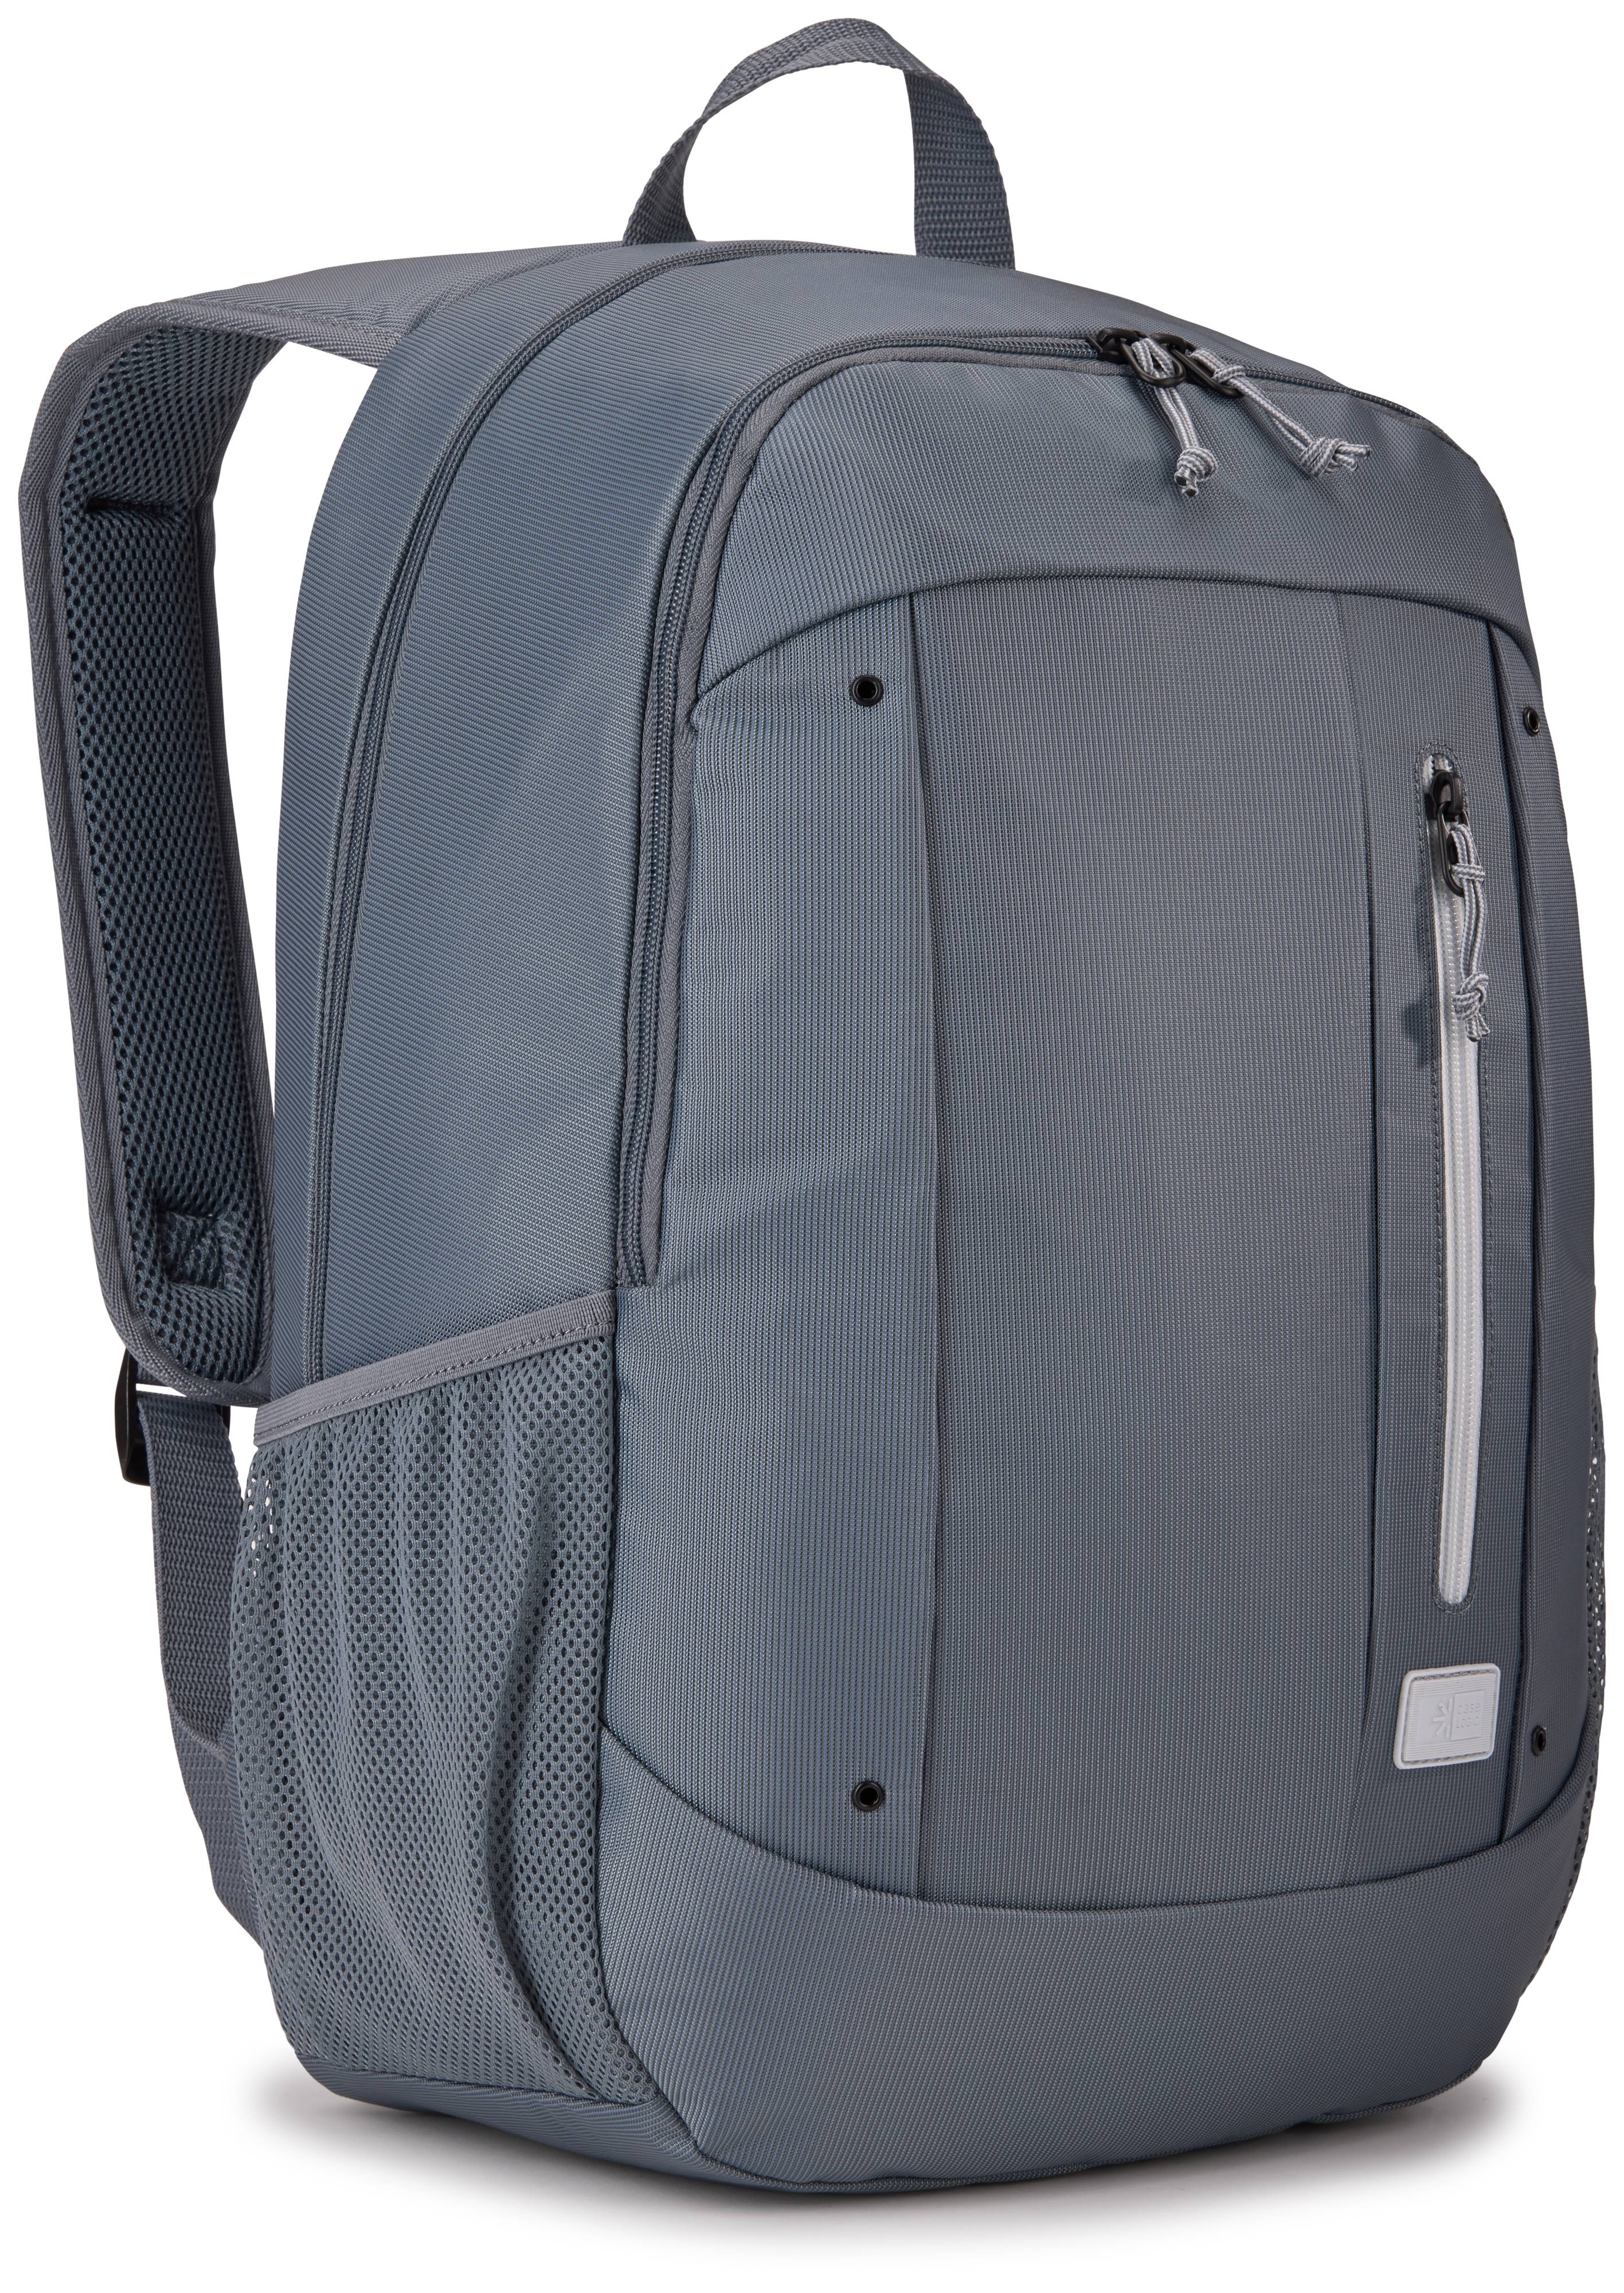 Rca Informatique - Image du produit : JAUNT RECYCLED BACKPACK 15.6IN STORMY WEATHER